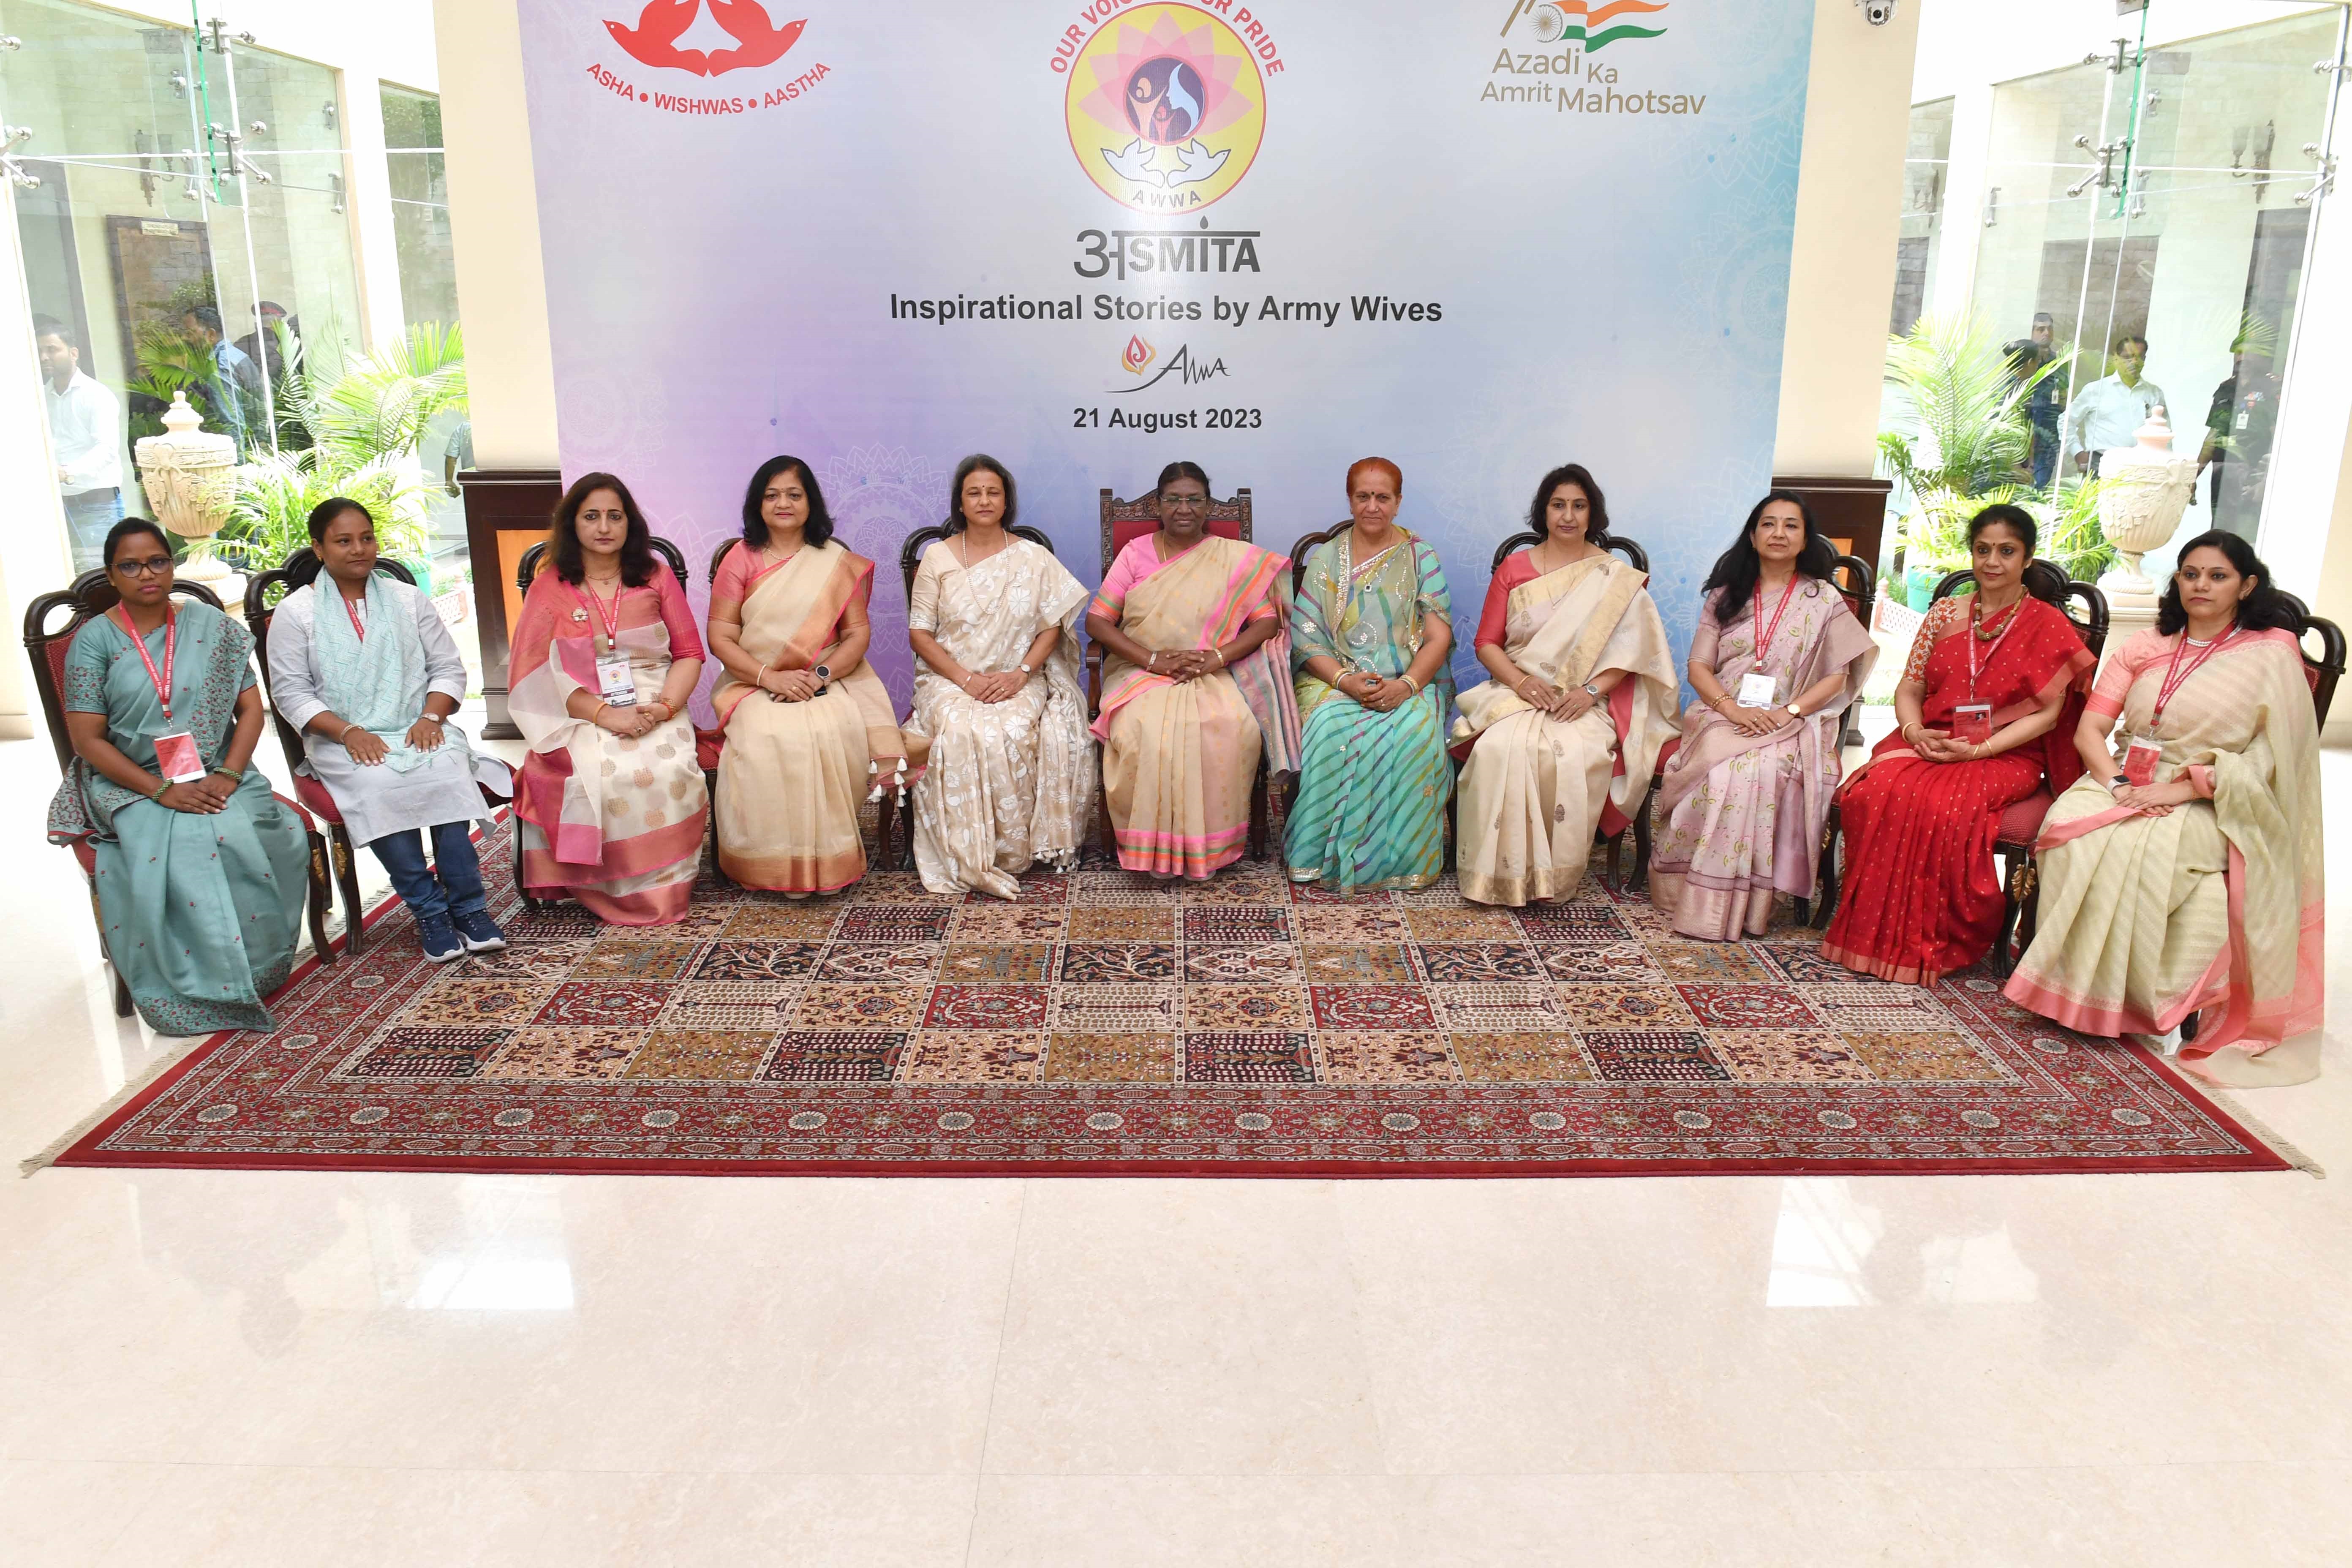  The President of India, Smt Droupadi Murmu graced 'ASMITA-Inspirational Stories by Army Wives', organised by the Army Wives Association (AWWA), in New Delhi on August 21, 2023.